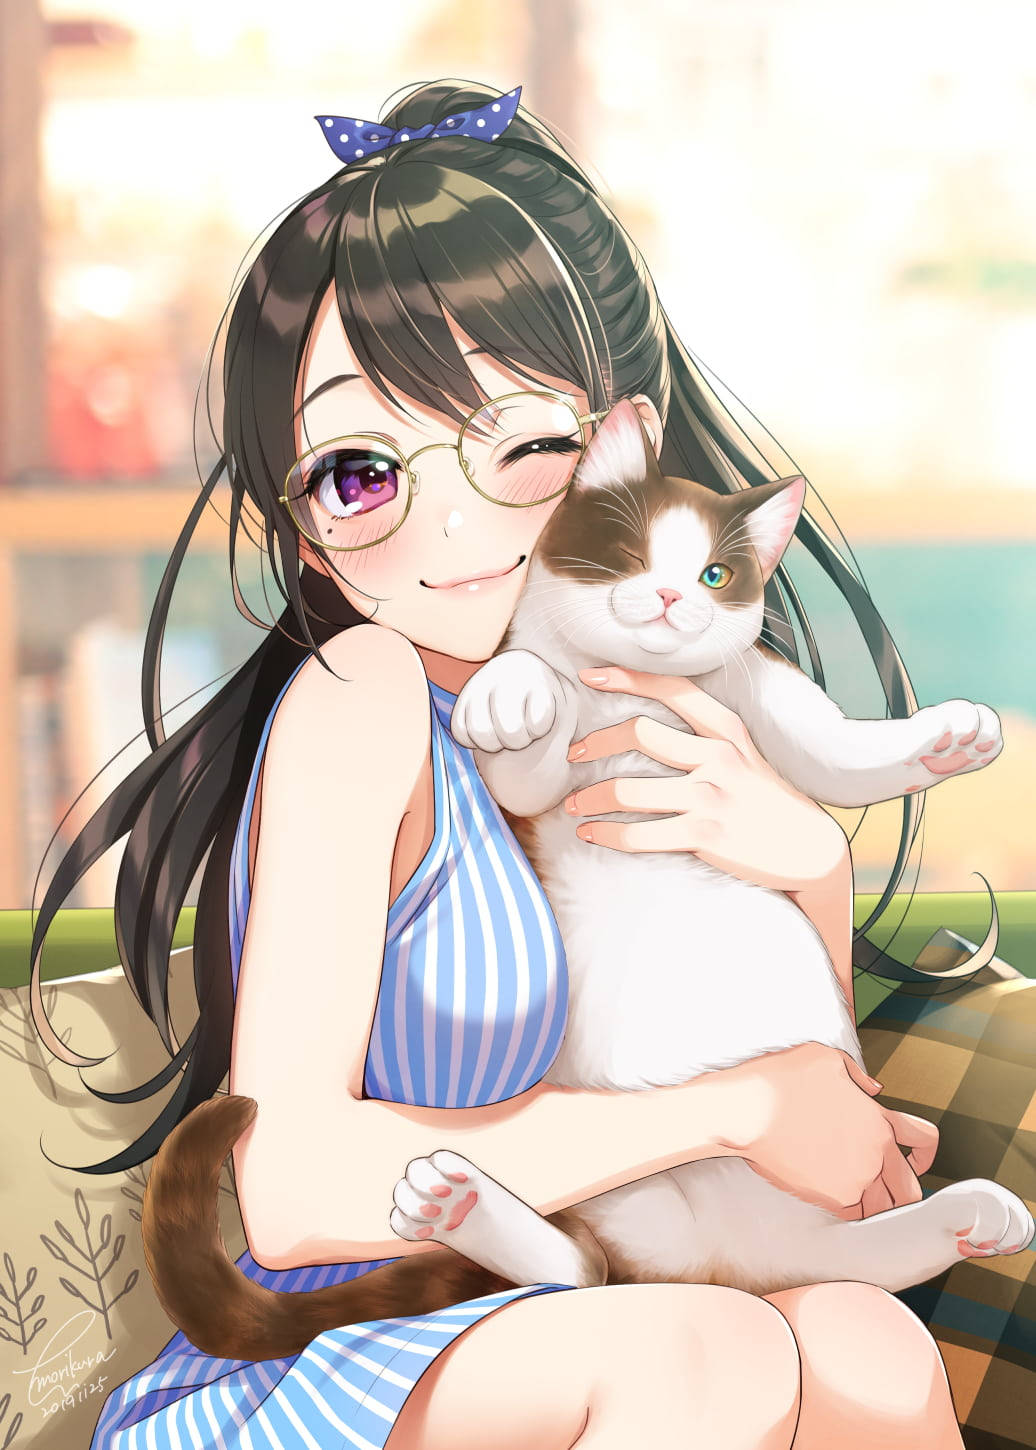 Aesthetic Anime Girl With Cat